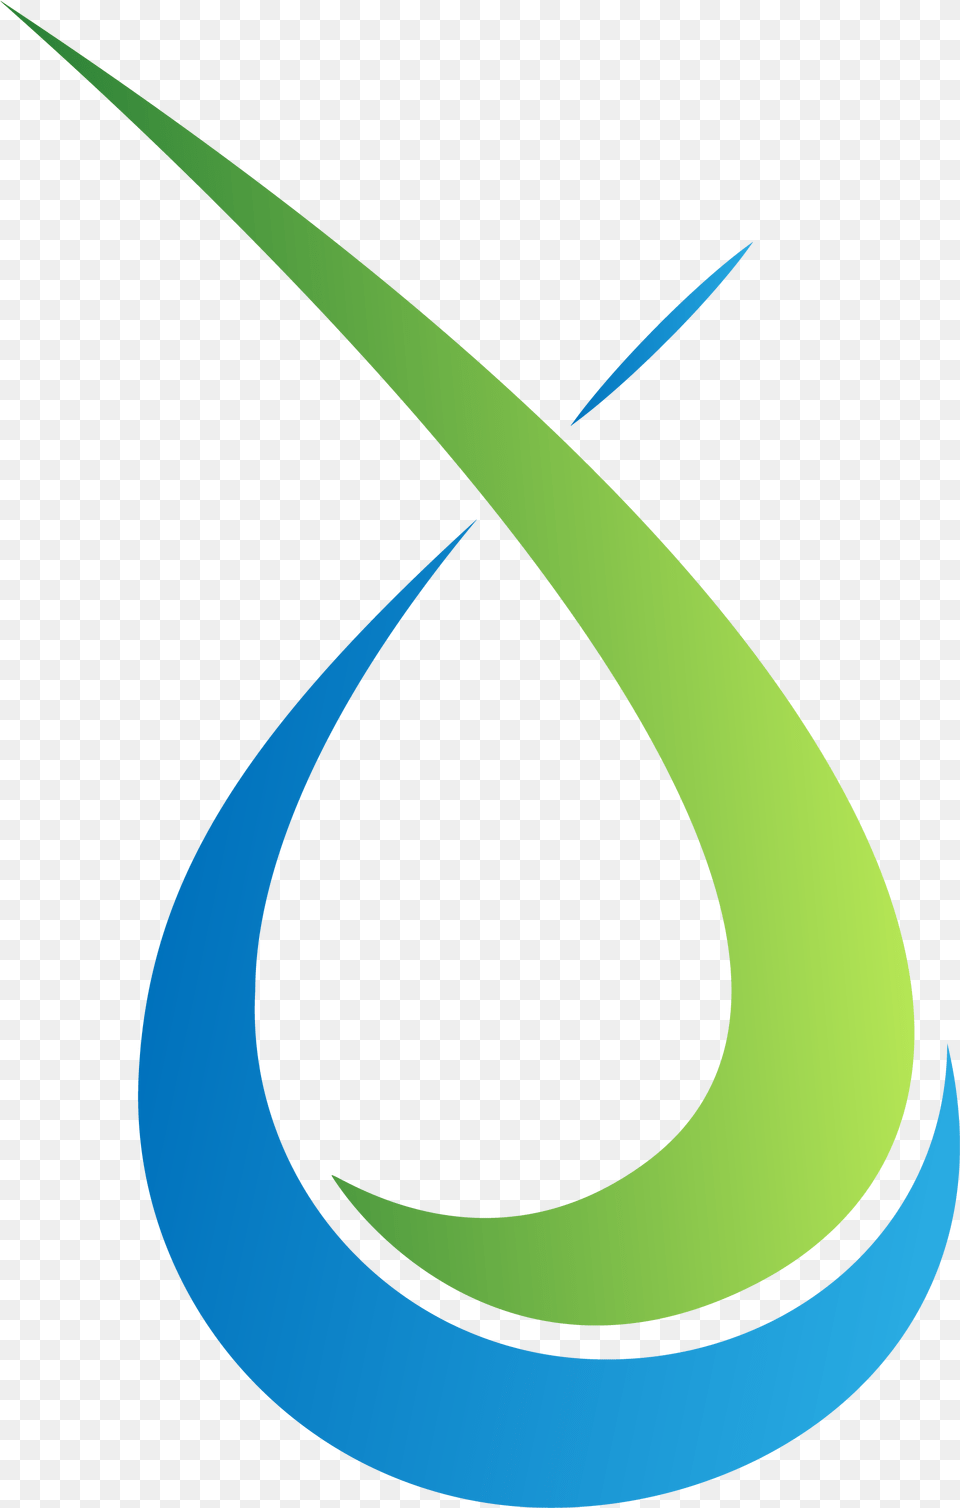 Eco Runner Team Delft Logo, Outdoors, Night, Nature, Art Png Image